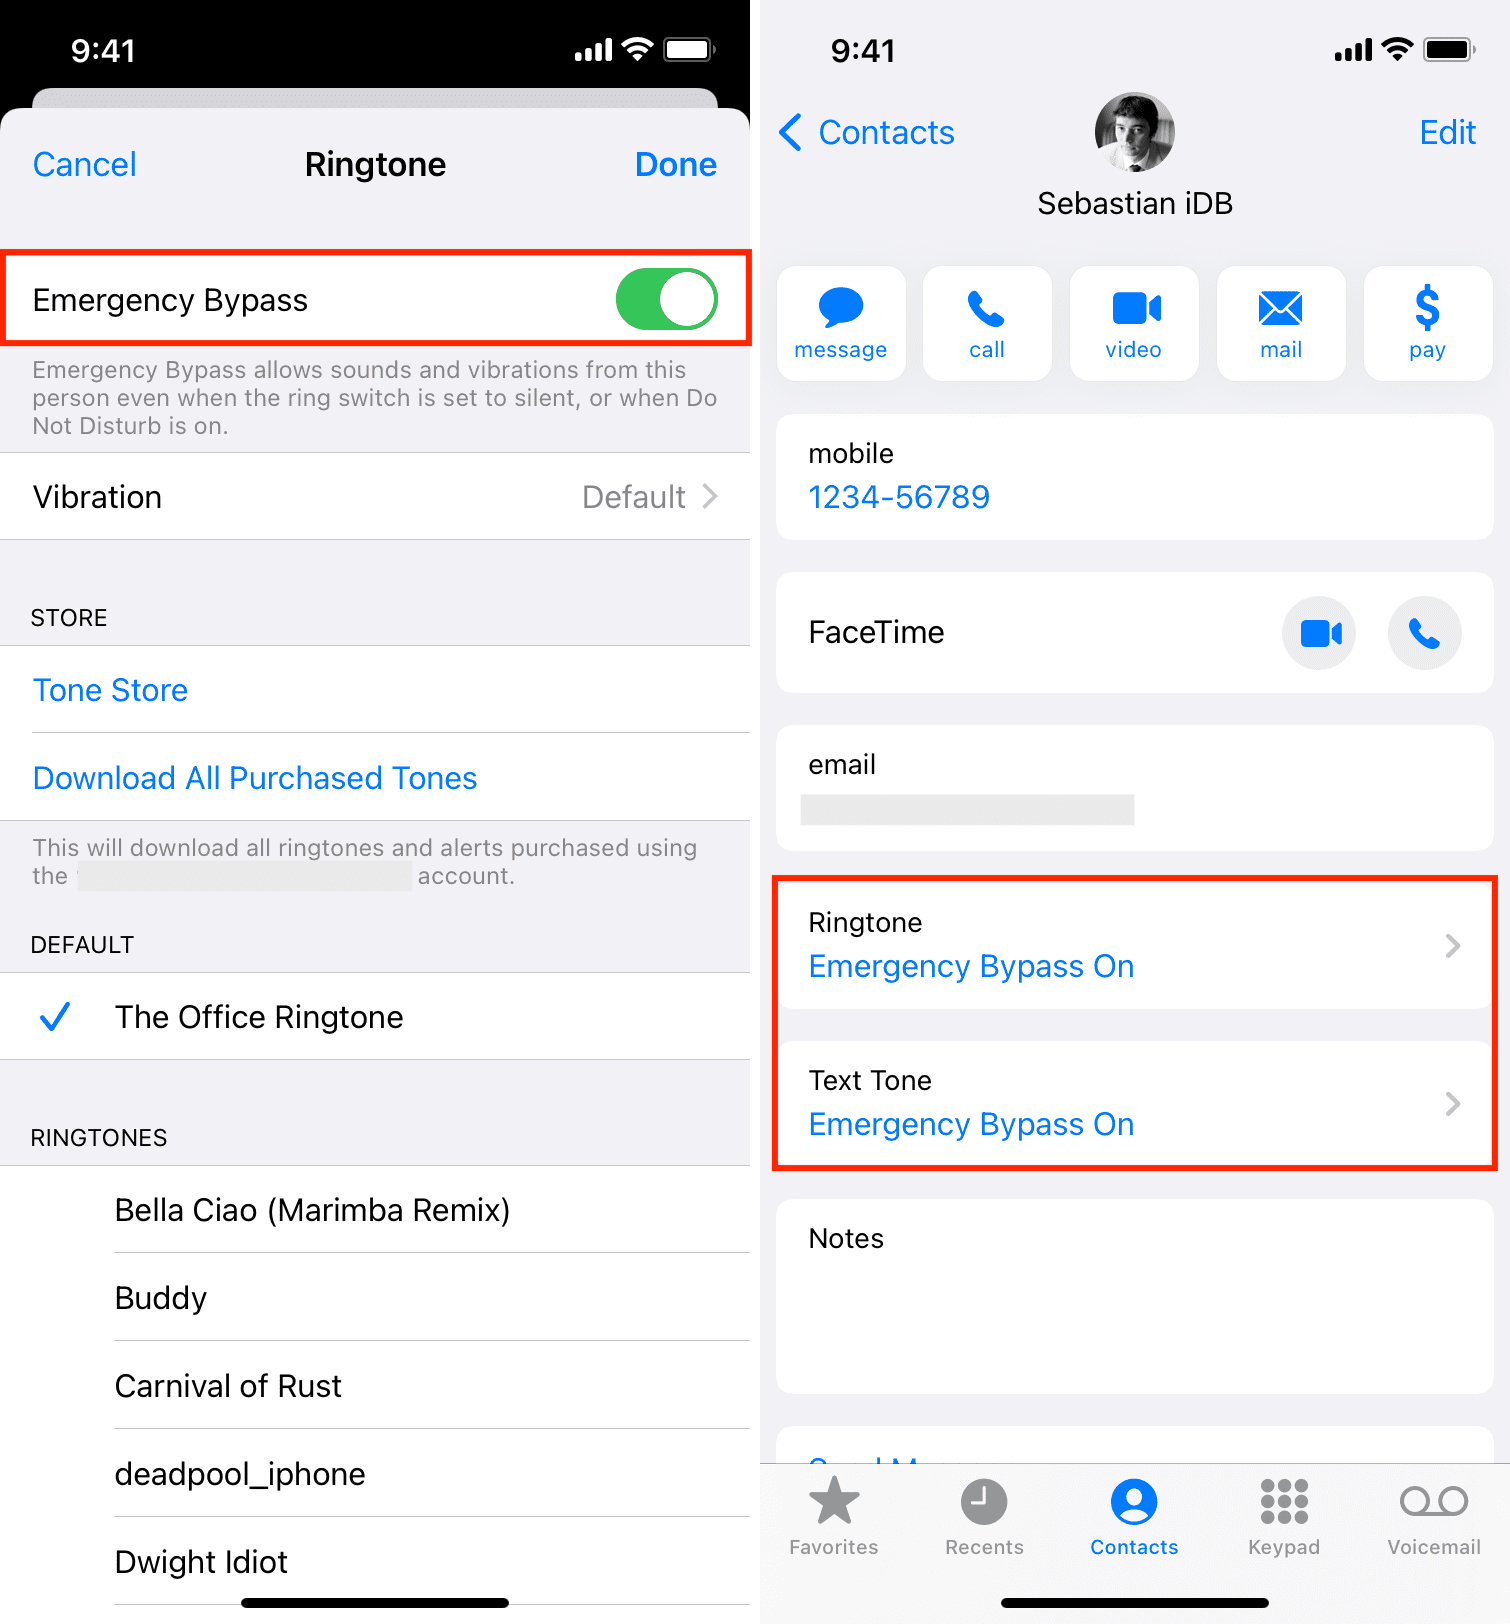 Enable Emergency Bypass for a contact on iPhone